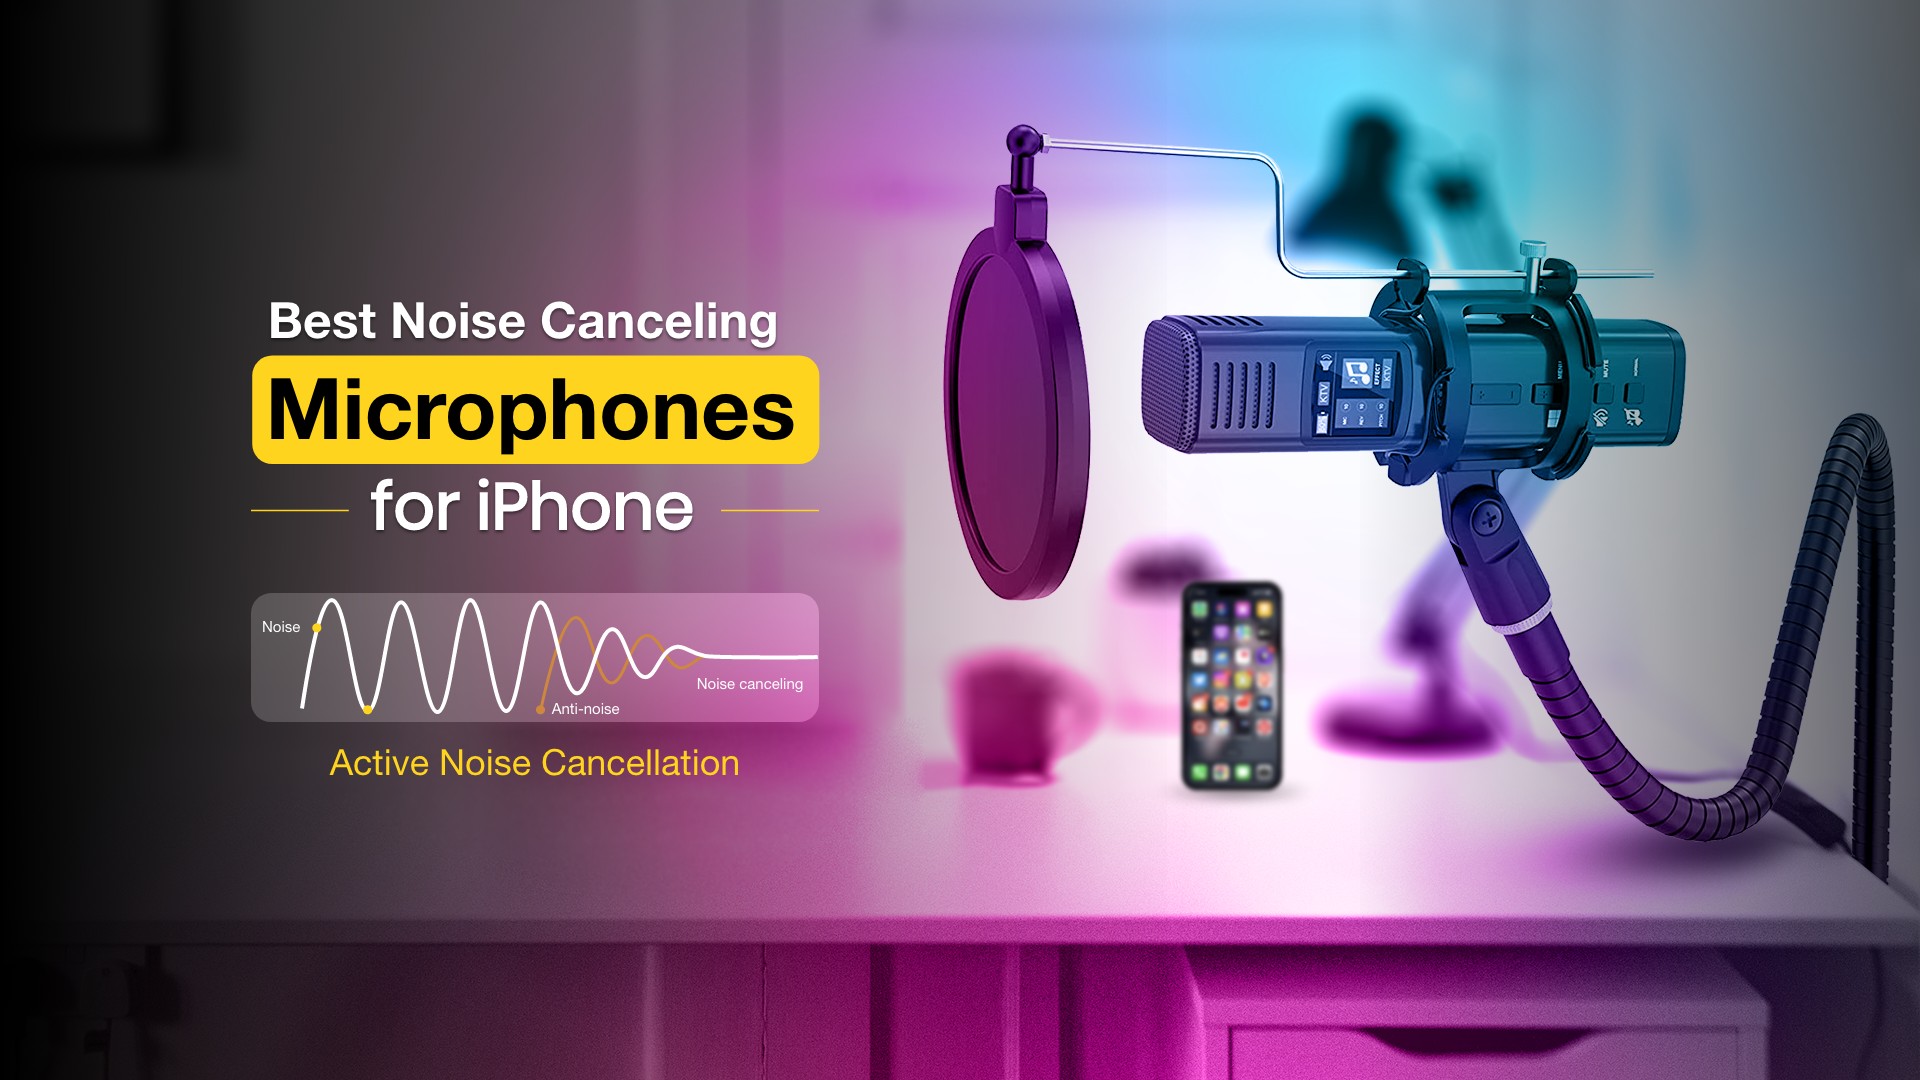 11 Best Noise Canceling Microphones for iPhone